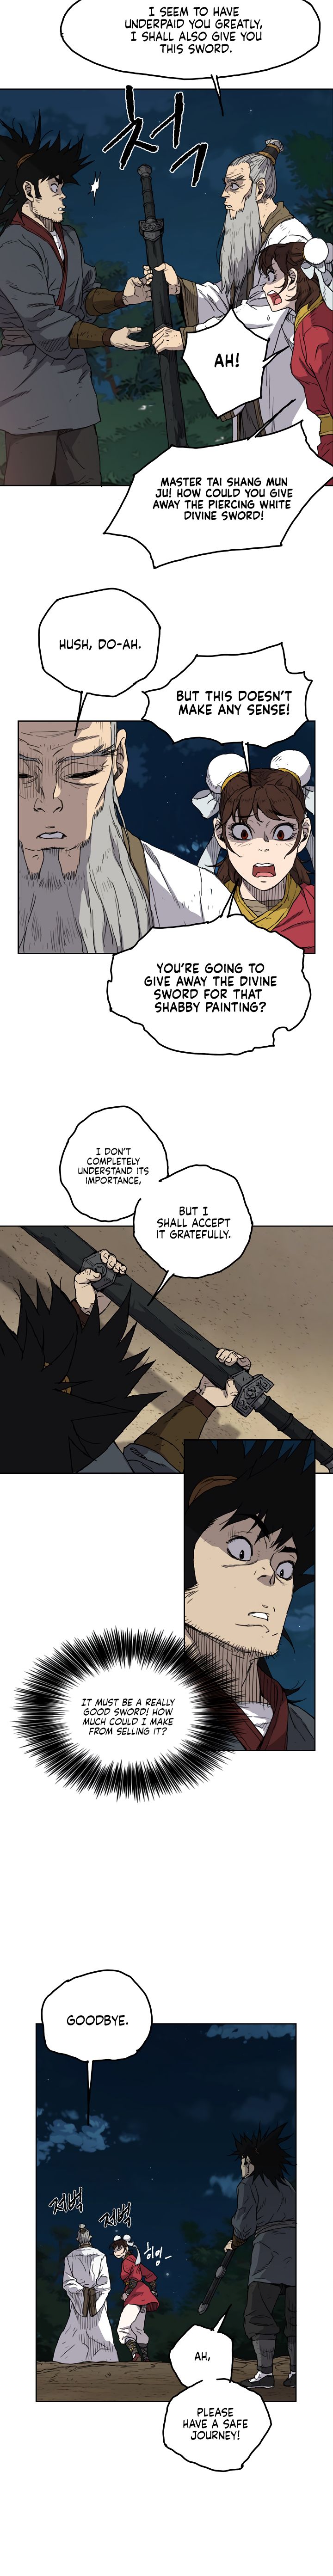 The Undefeatable Swordsman - Chapter 4 Page 3